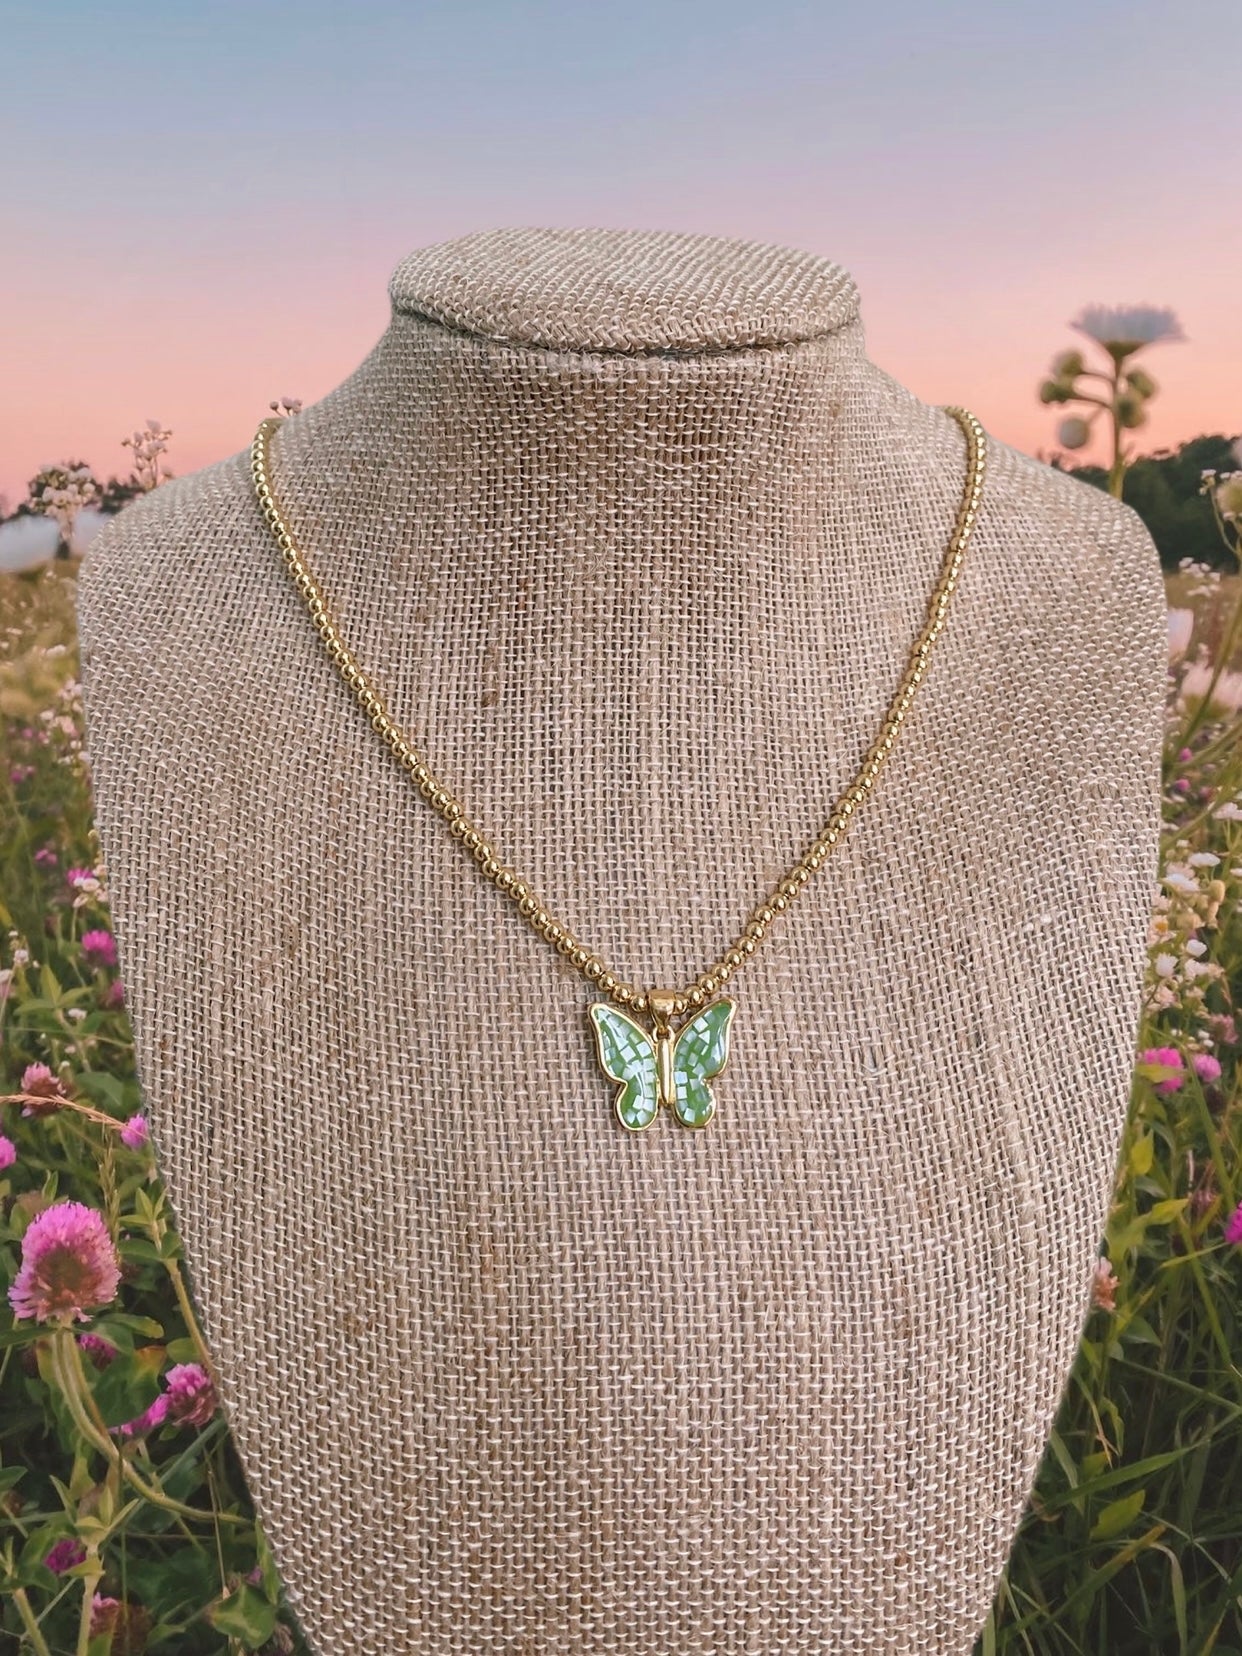 MOSAIC BUTTERFLY NECKLACE